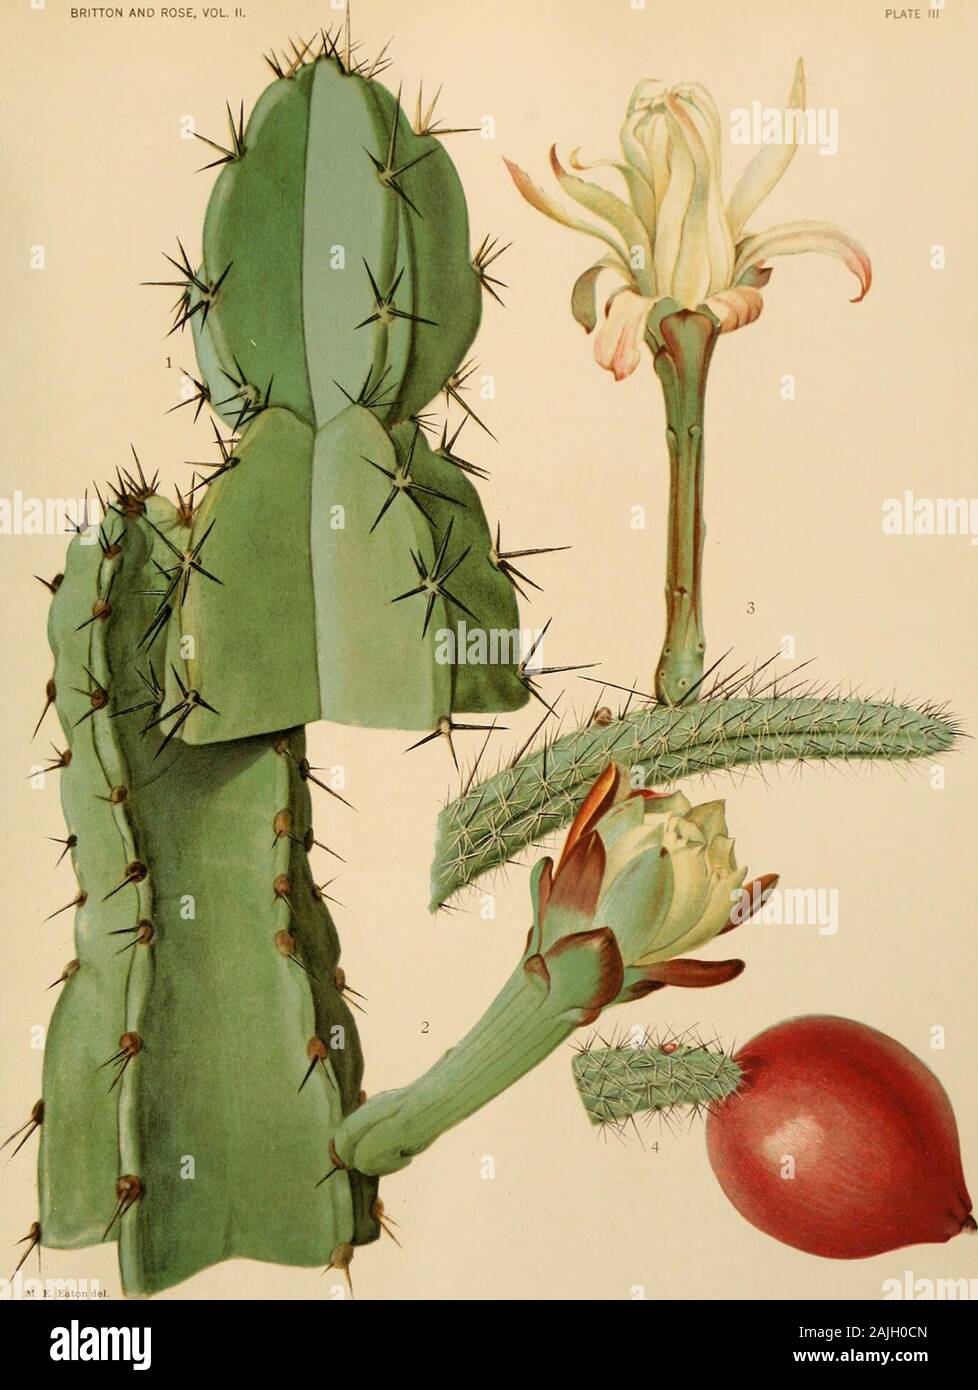 The Cactaceae : descriptions and illustrations of plants of the cactus family . obtusangulus (now Zygocactus)in his series Anomali, but in his Keys, published about the same time, he again has it inthe series Tenuiores. Berger places it in his subgenus Piptanthocereus, while Riccobono hasrecently transferred it to his genus Eriocereus. Dr. Schumann discusses Cereus lauterbachii Schumann (Bull. Herb. Boiss. II. 3: 250.1903) in connection with this species, but does not point out how they differ. Both the names Cereus cavendishii and C. paxtonianus were in general use until Schu-mann in 1897 sug Stock Photo